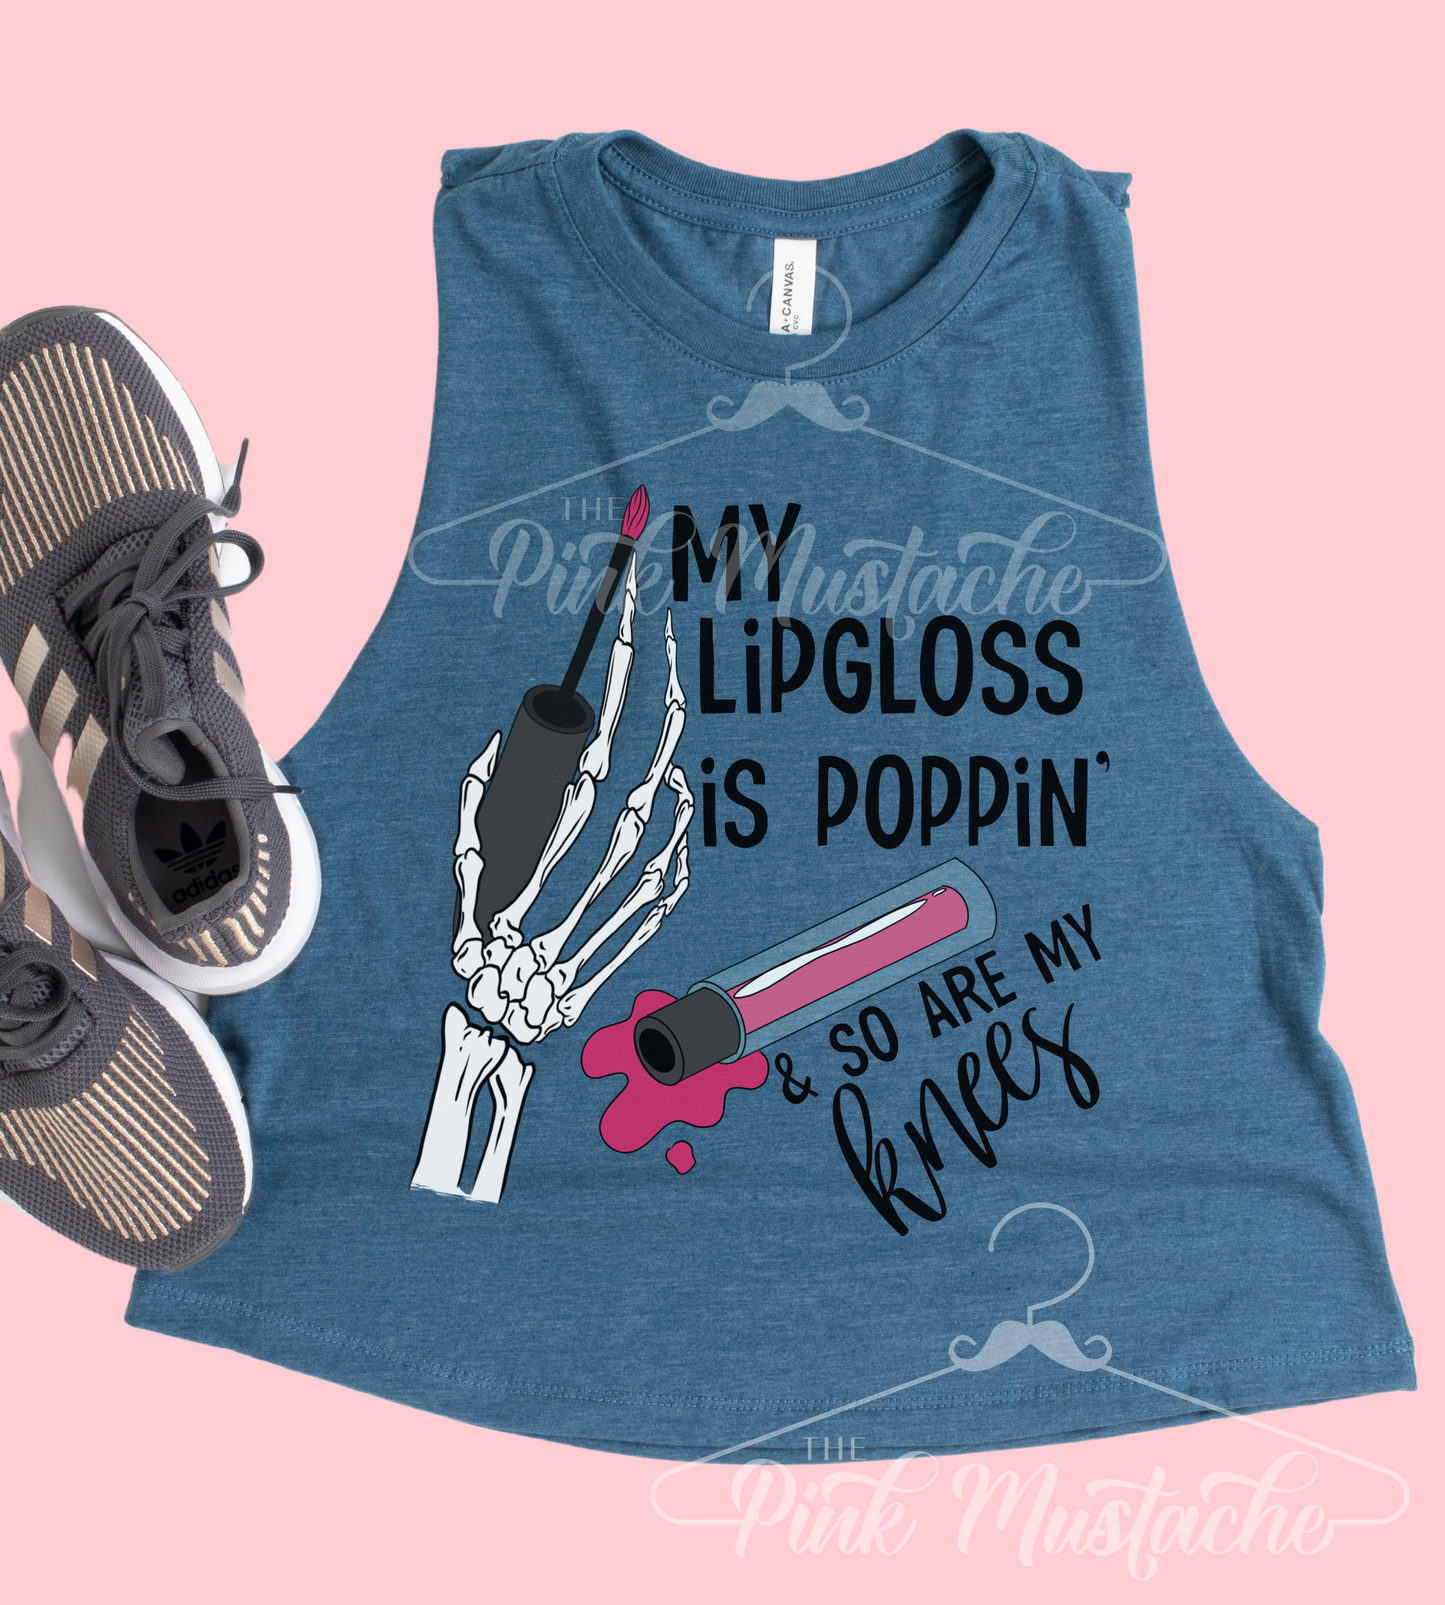 My Lip Gloss Is Poppin' And So Are My Knees Funny Cropped Tank/ Gifts for Her/ Funny Tank Top/ Adult Sizes Available